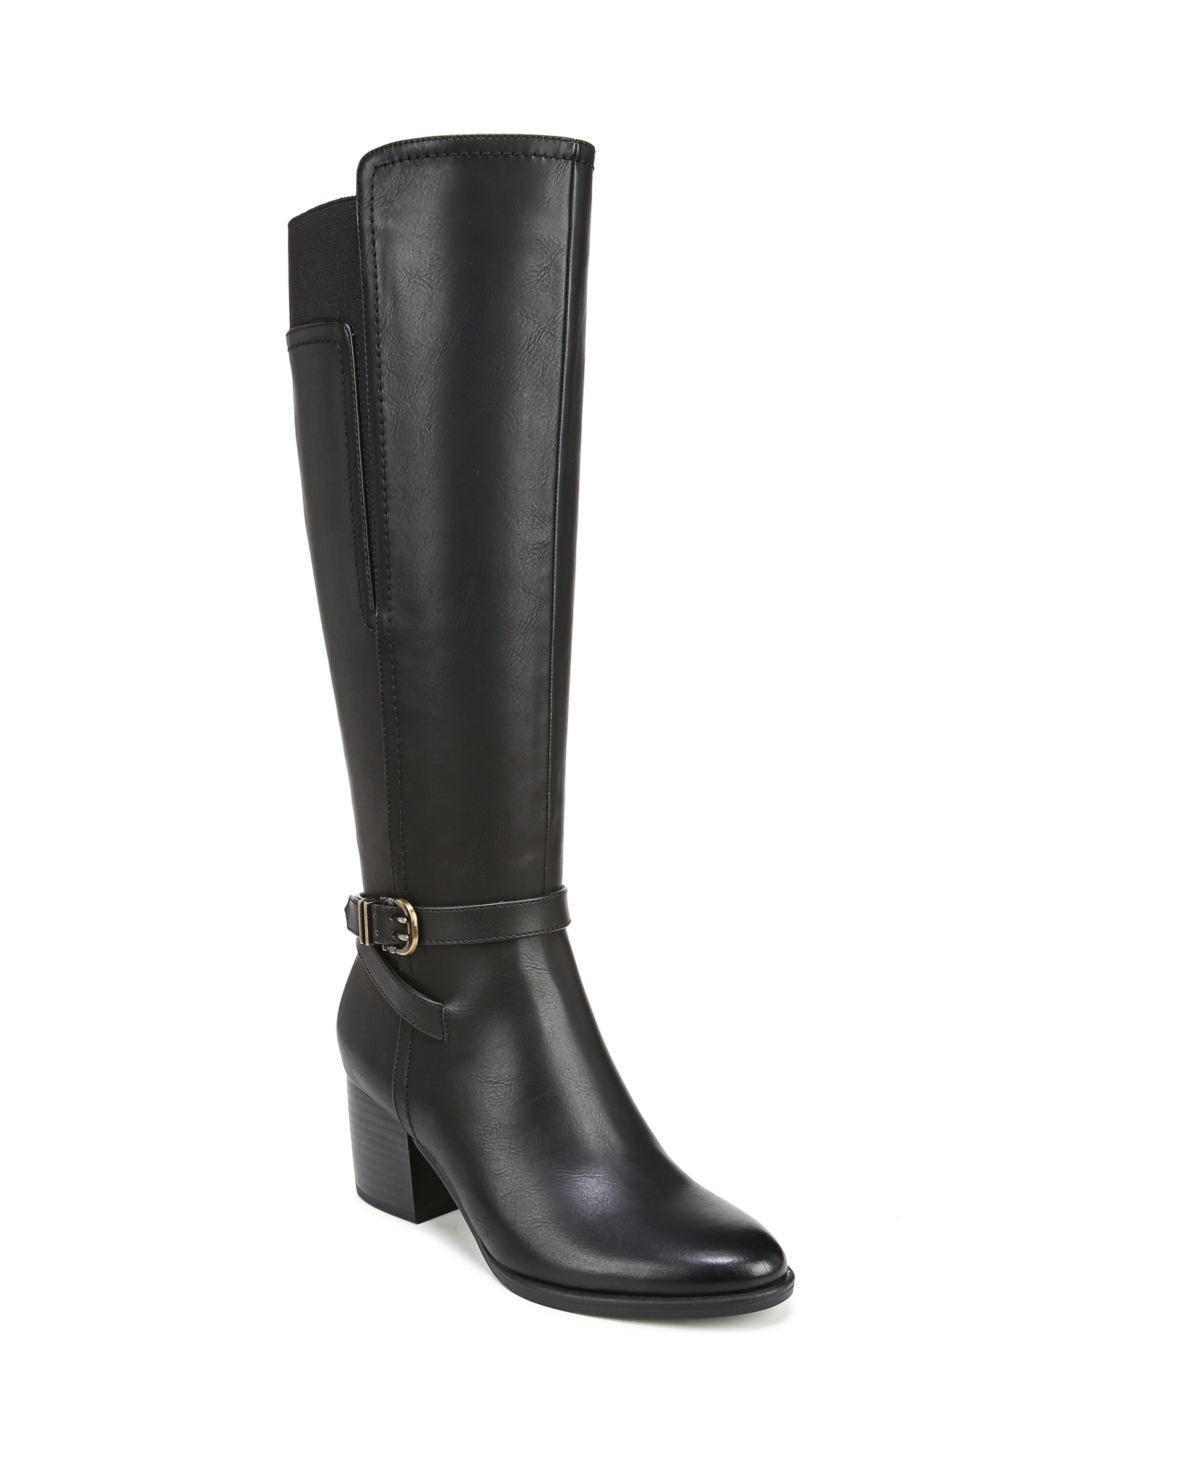 Uptown Knee High Boots - Dark Brown Faux Leather